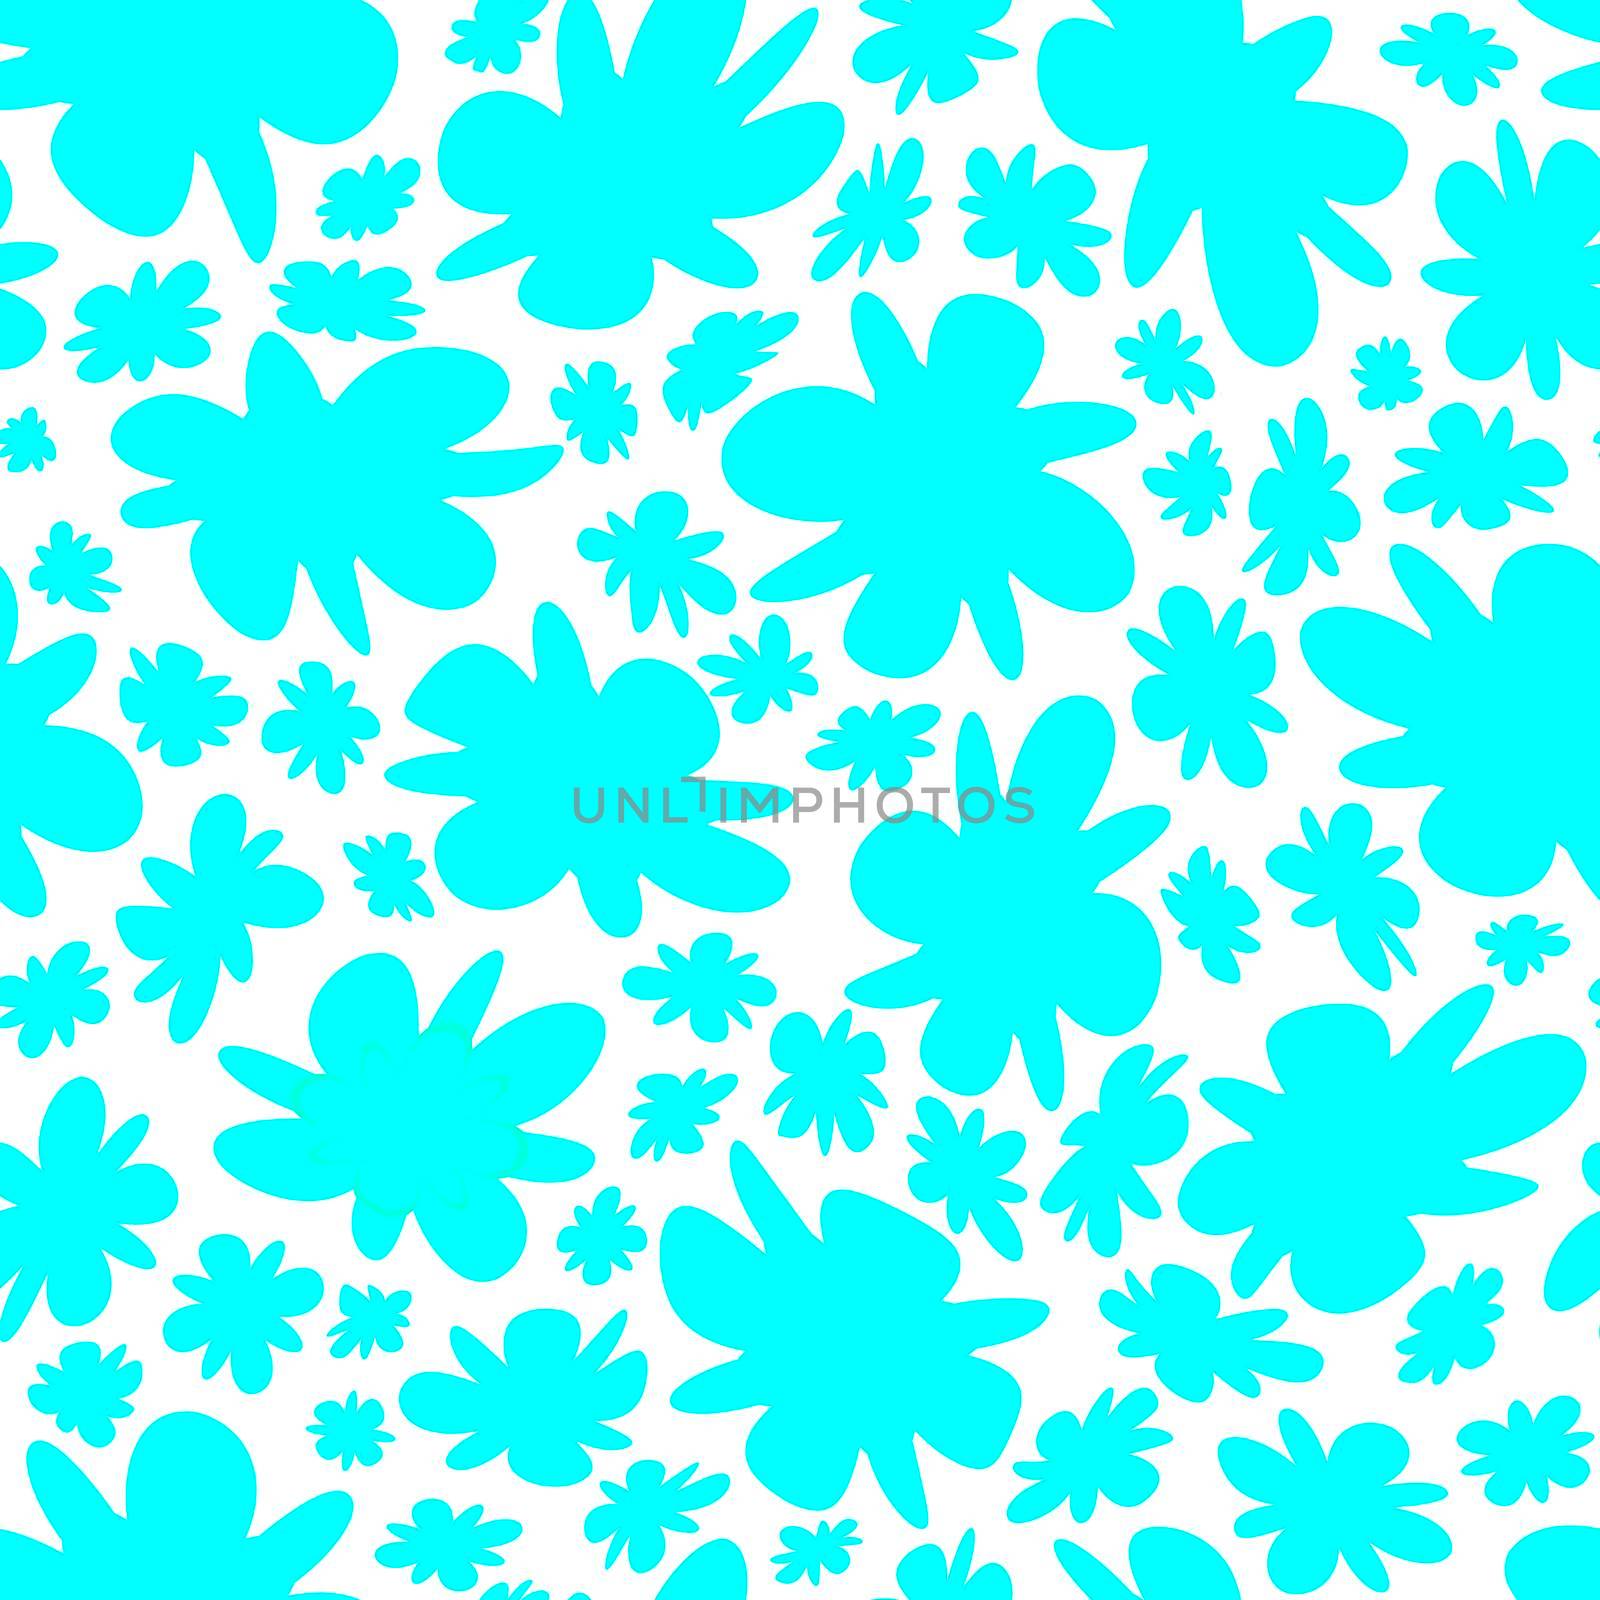 Trendy fabric pattern with miniature flowers.Summer print.Fashion design.Motifs scattered random.Elegant template for fashion prints.Good for fashion,textile,fabric,gift wrapping paper.Azure on white.